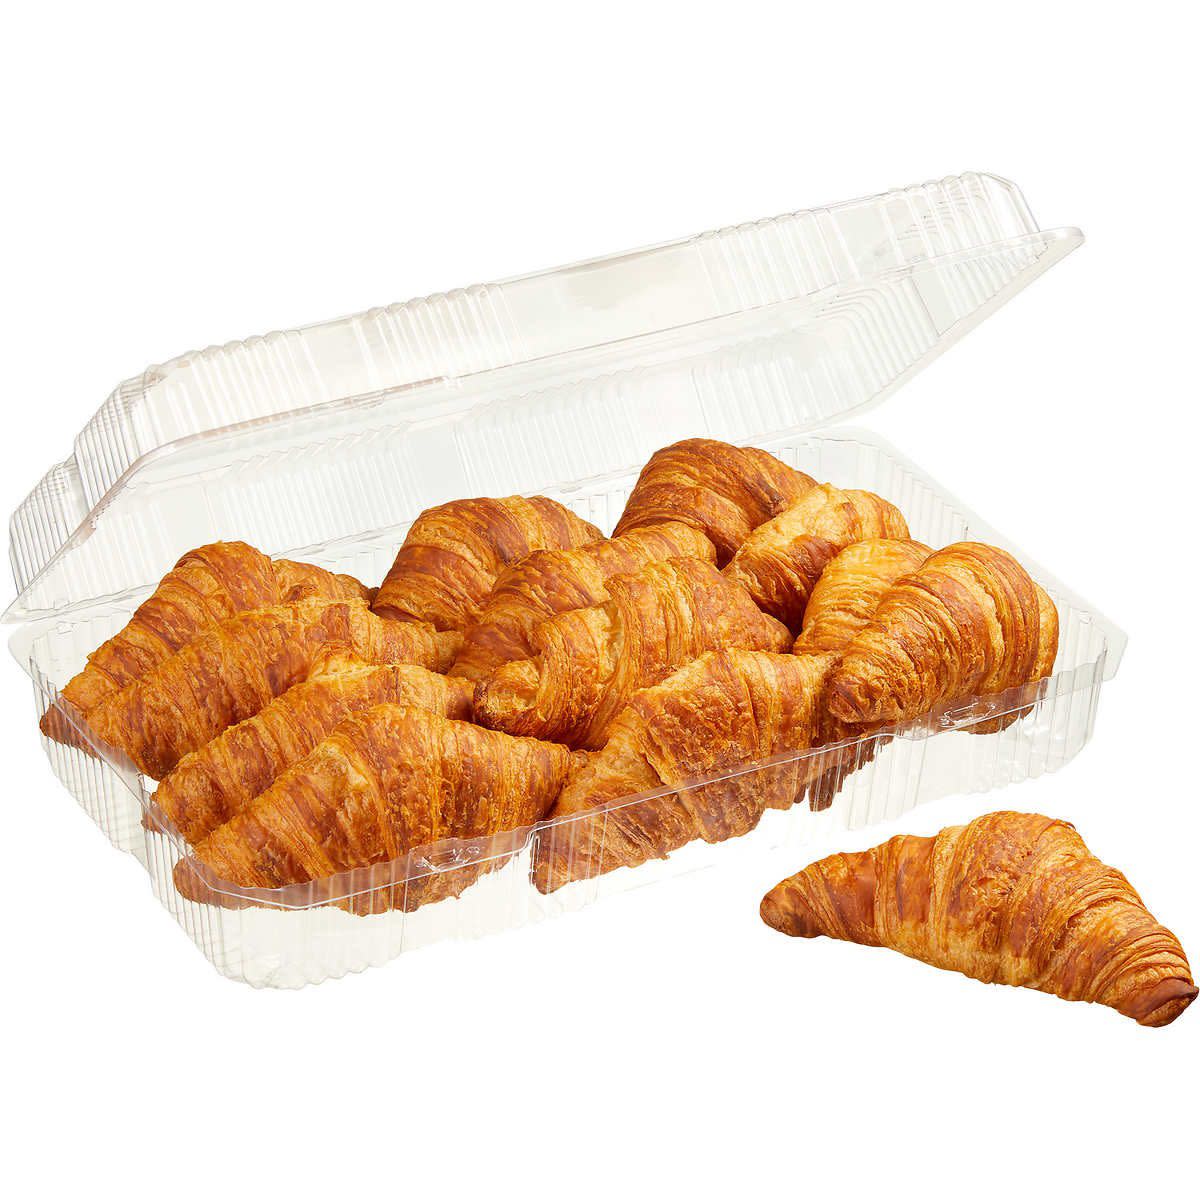 Plastic container filled with Costco croissants